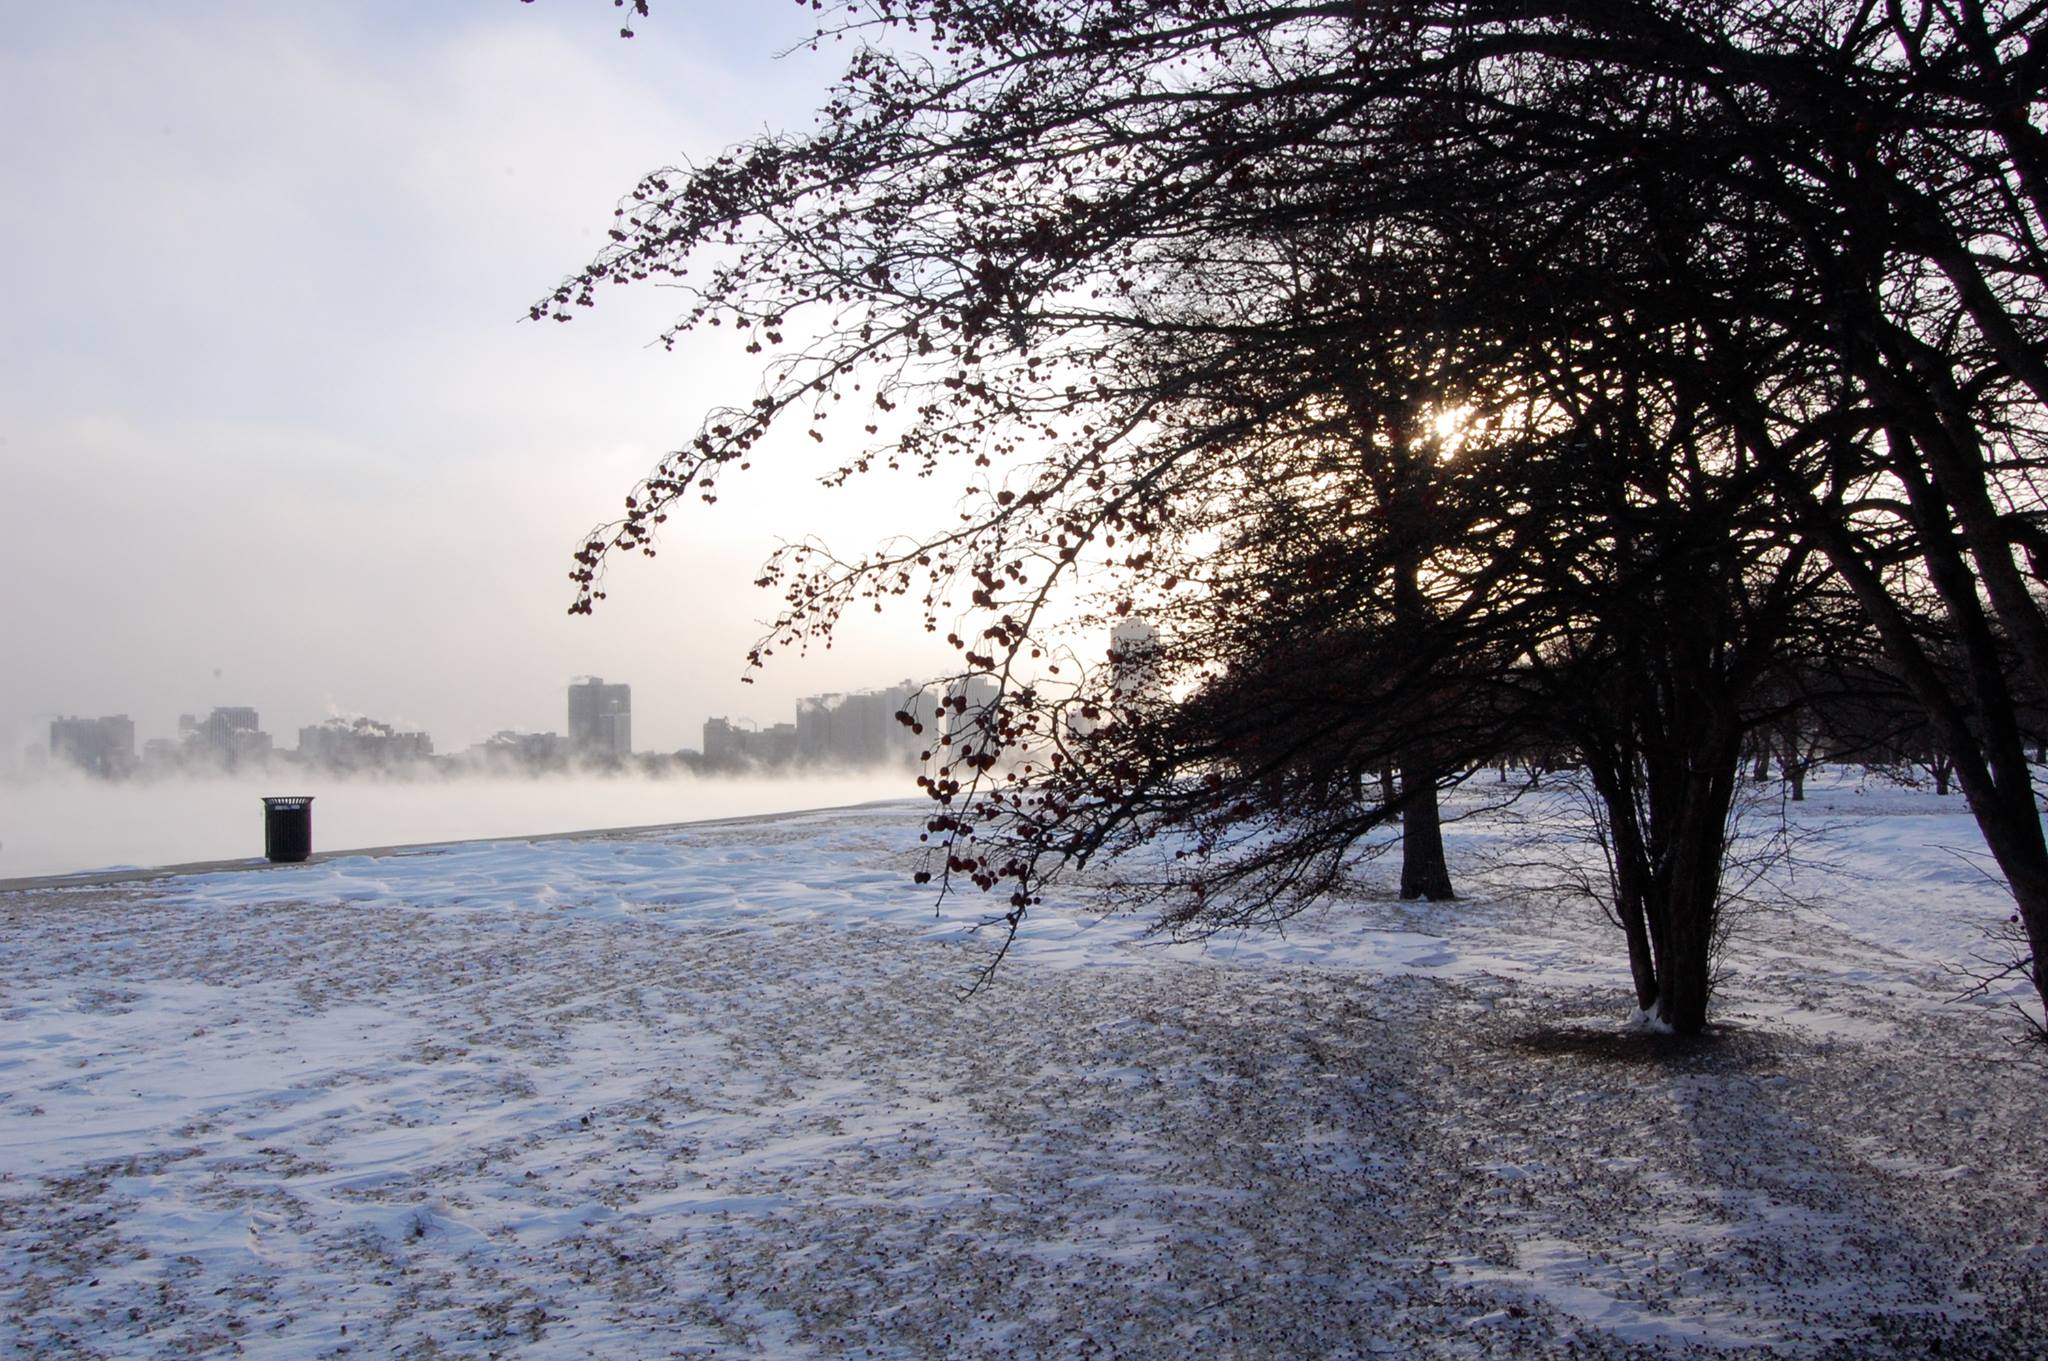 A lakefront park in winter, overlooking a steaming lake, and the Chicago skyline, south of Montrose Harbor